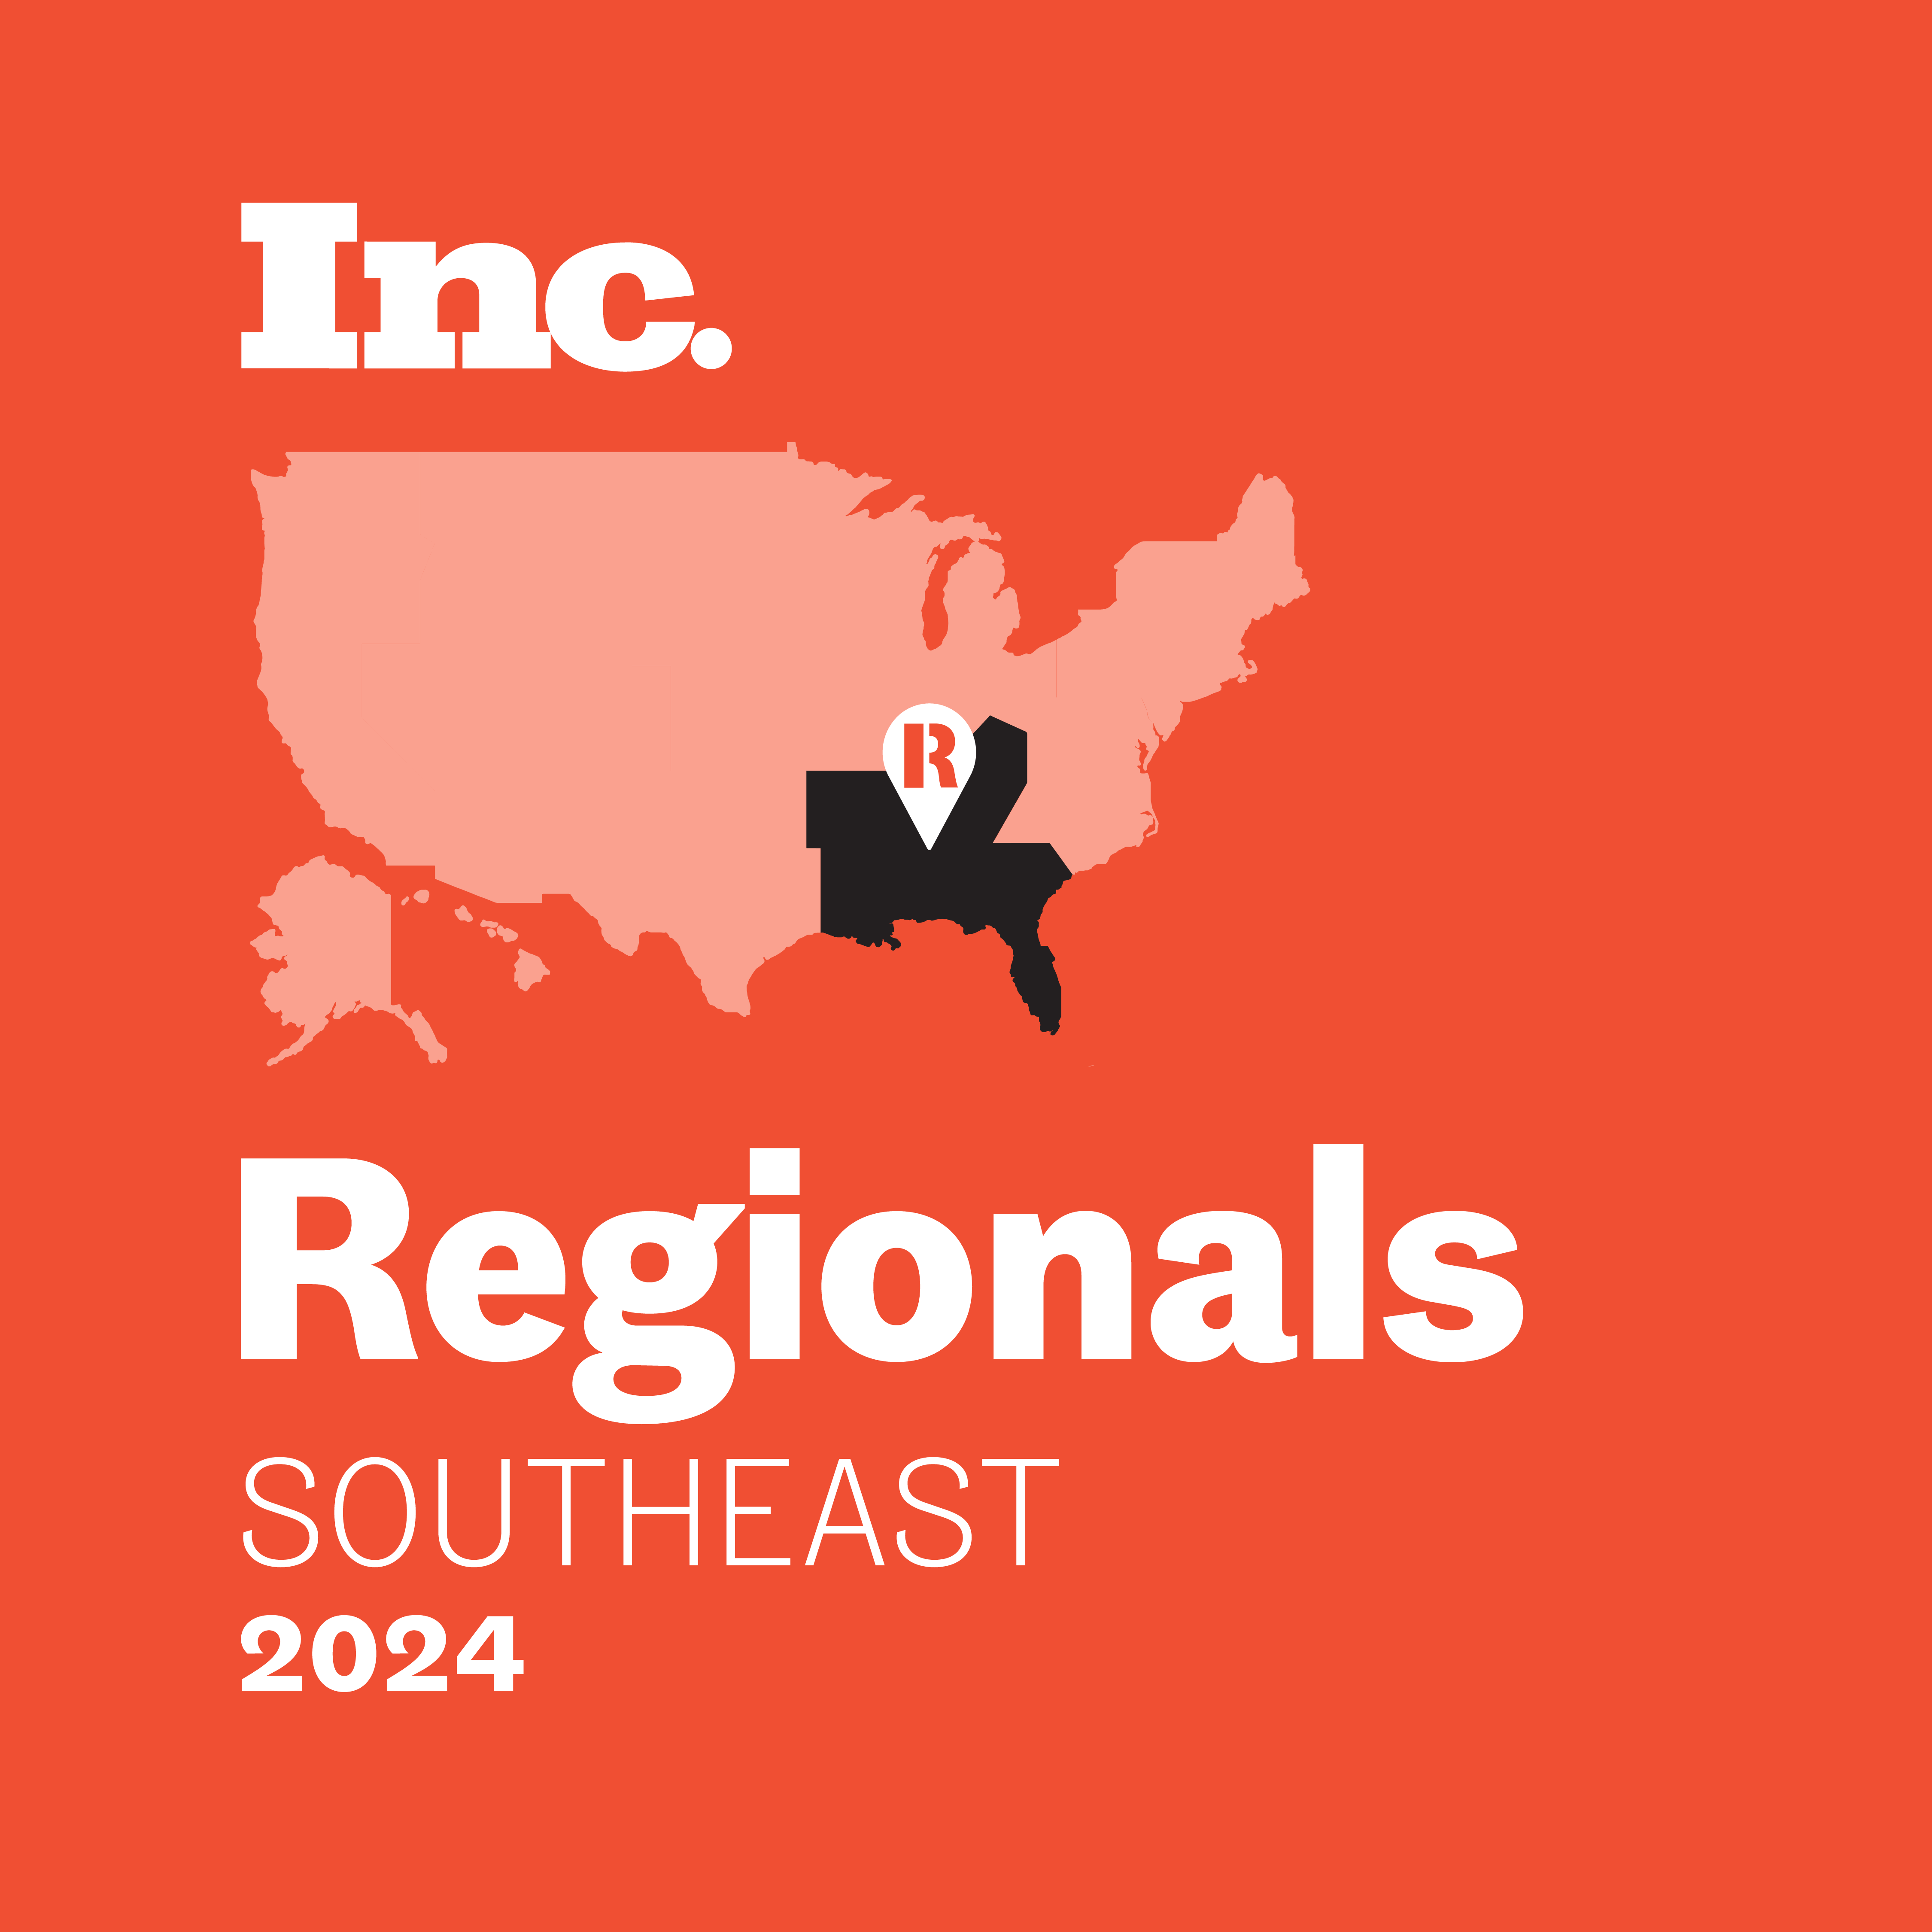 Atlanta Personal Injury Law Group – Gore made the 2024 #IncRegionals list of fastest-growing companies in the Southeast.